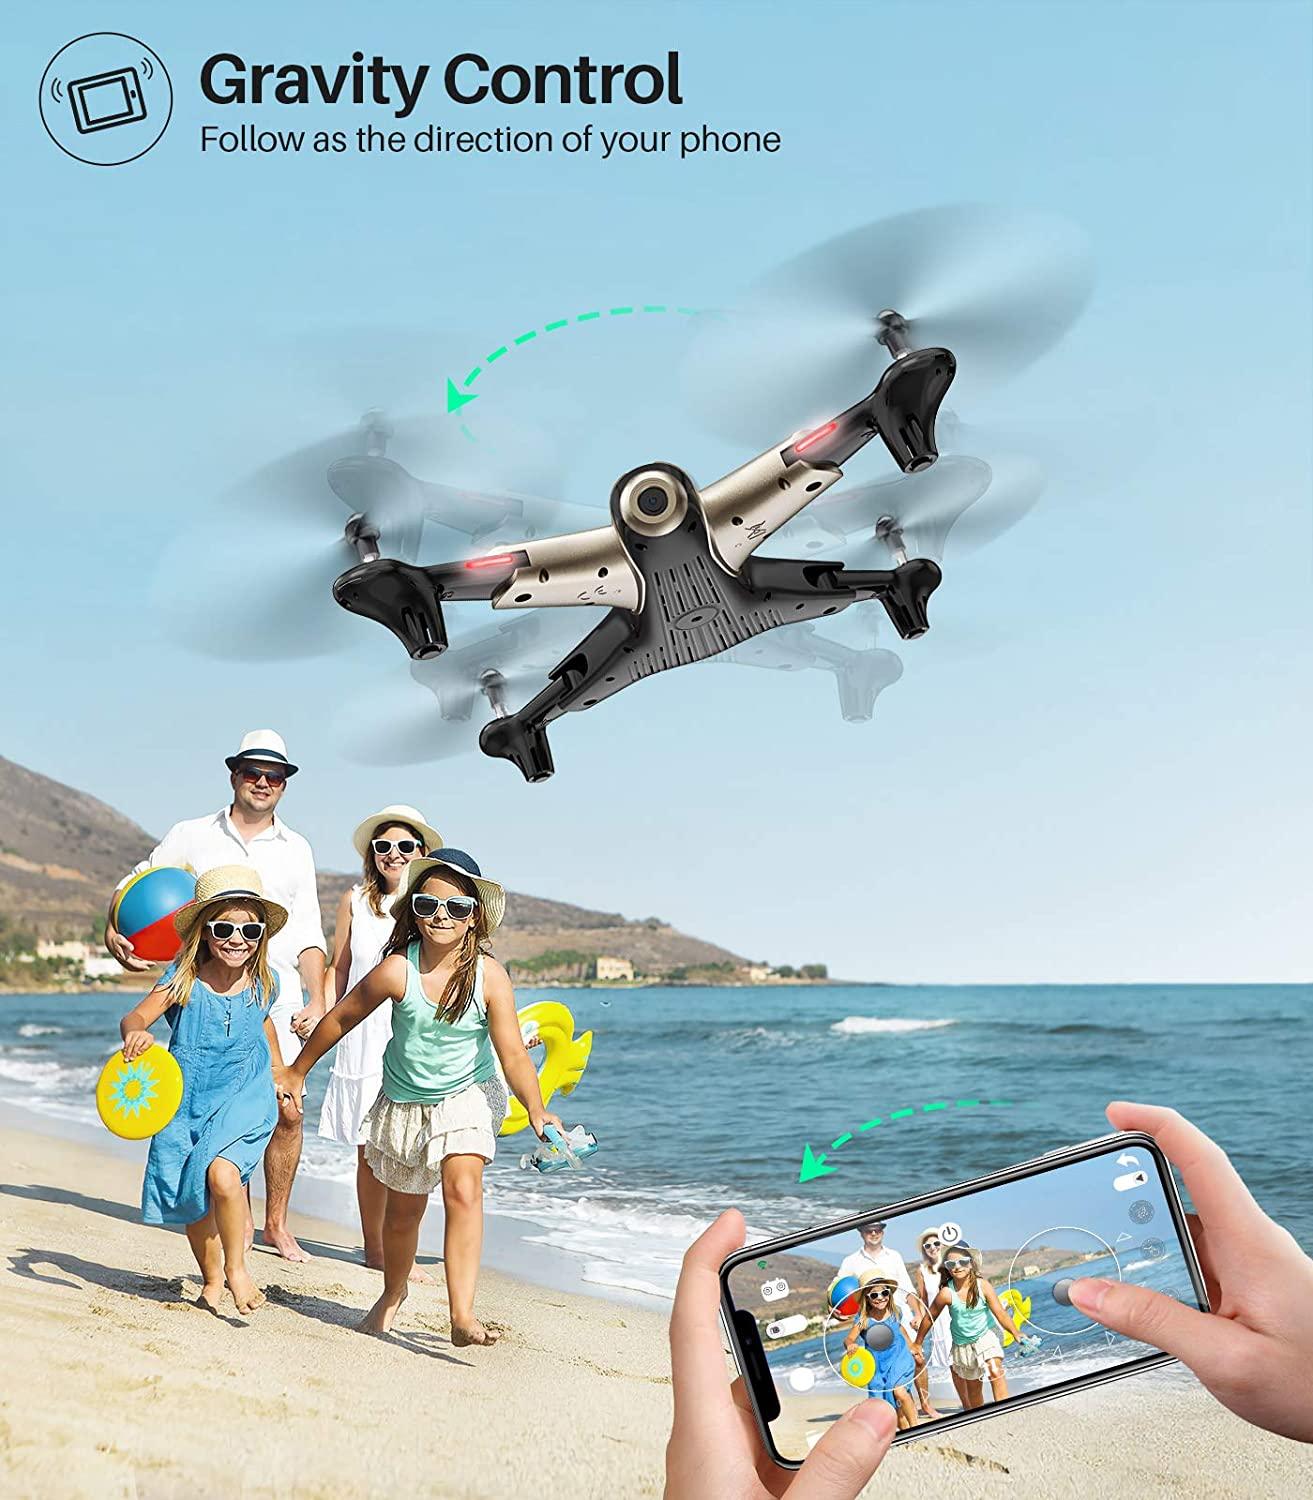 SYMA X300 Drone - with 1080P FPV Camera,Optical Flow Positioning,Tap Fly,Altitude Hold,Headless Mode,3D Flips,2 Batteries 40mins Flying UFO Remote Control Quadcopter for Kids Beginners - RCDrone